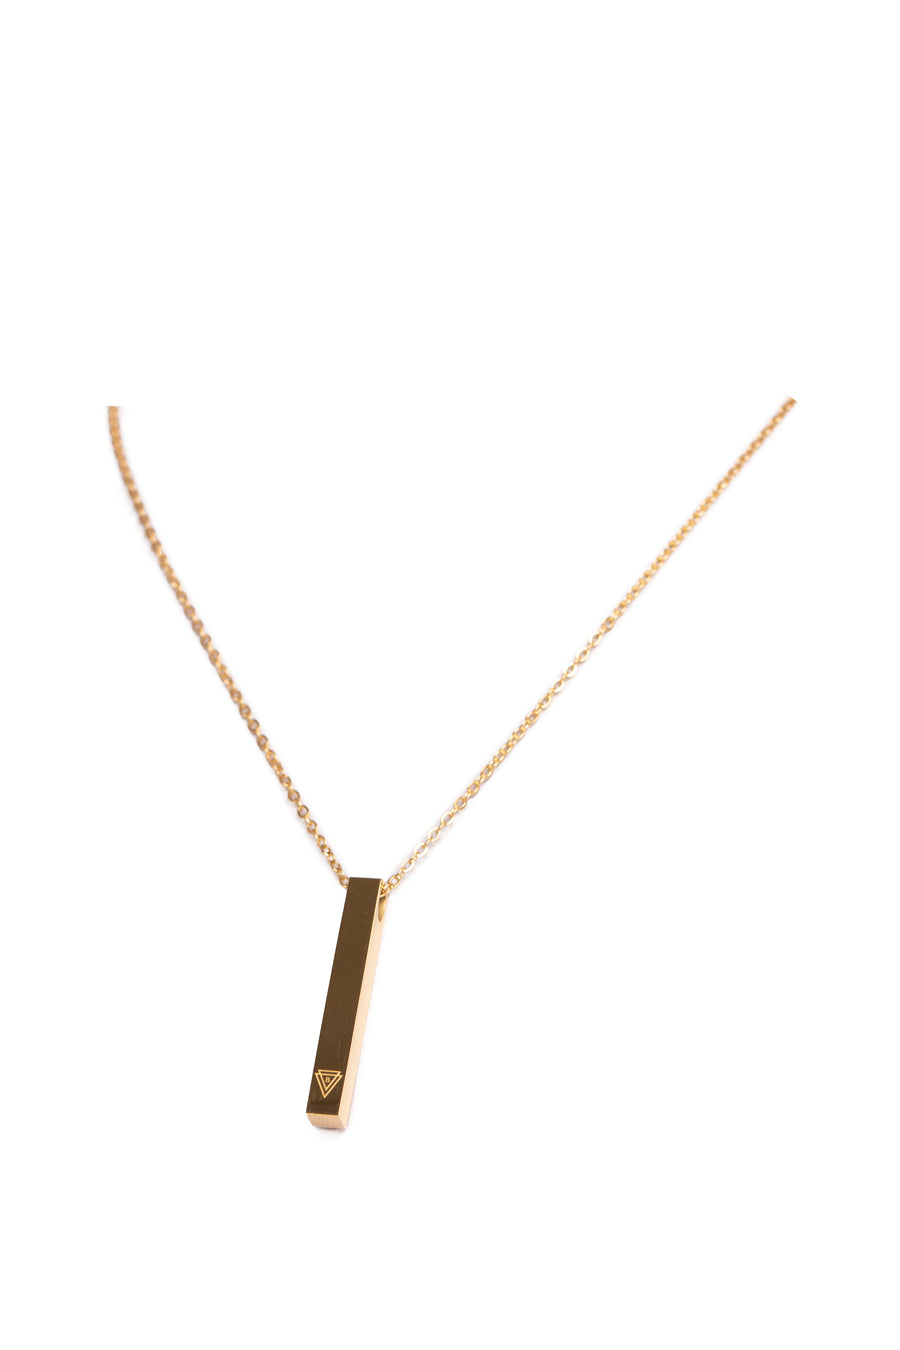 Back of gold empowering rectangular necklace